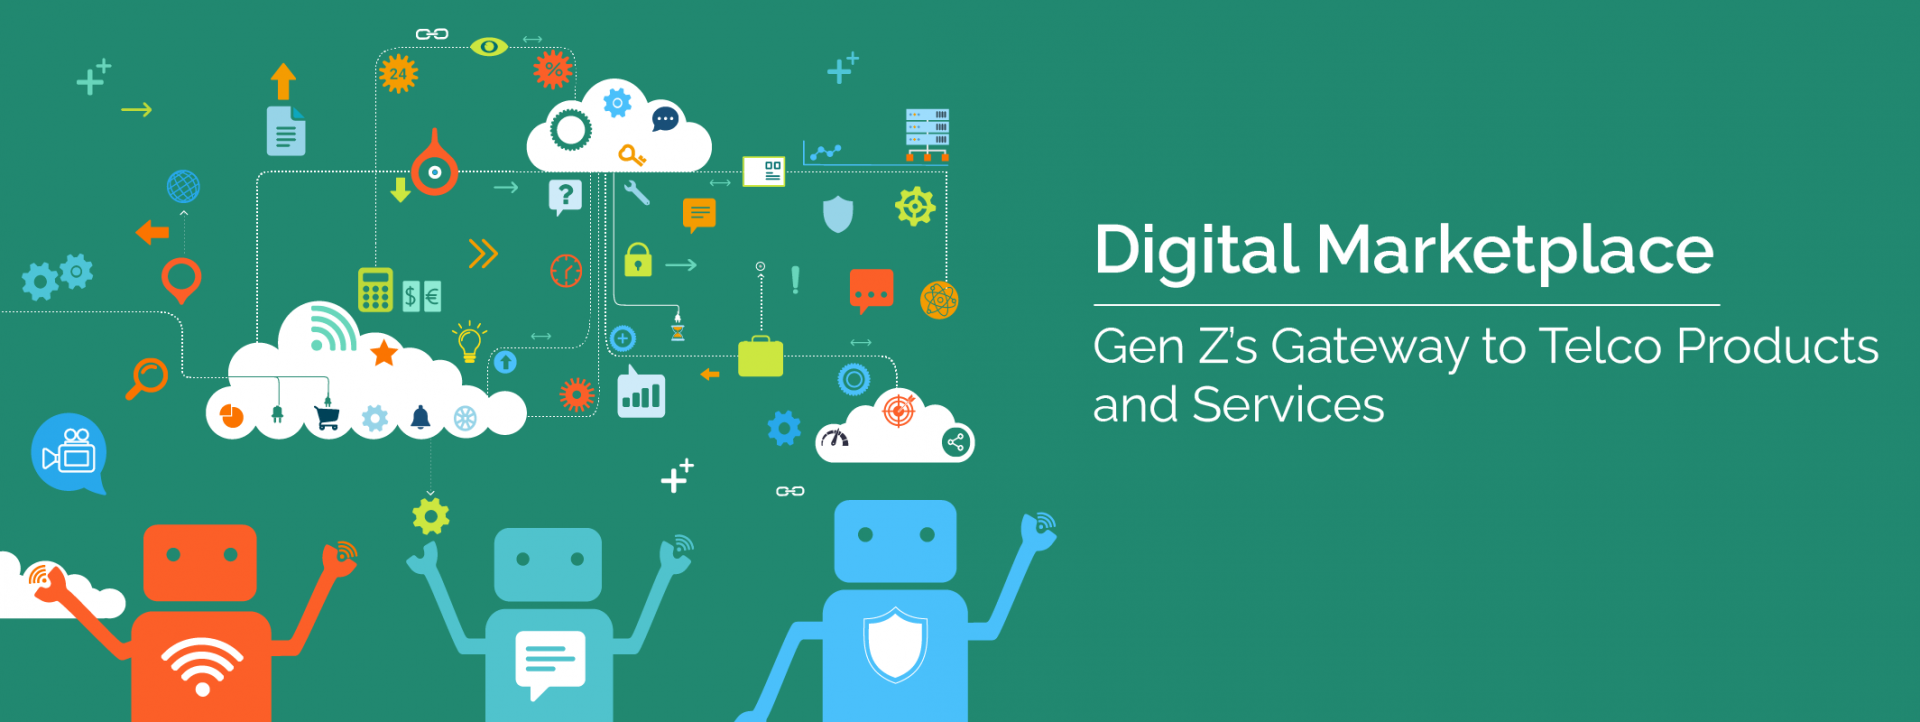 Digital Marketplace – GenZ's Gateway to Telco Products and Services